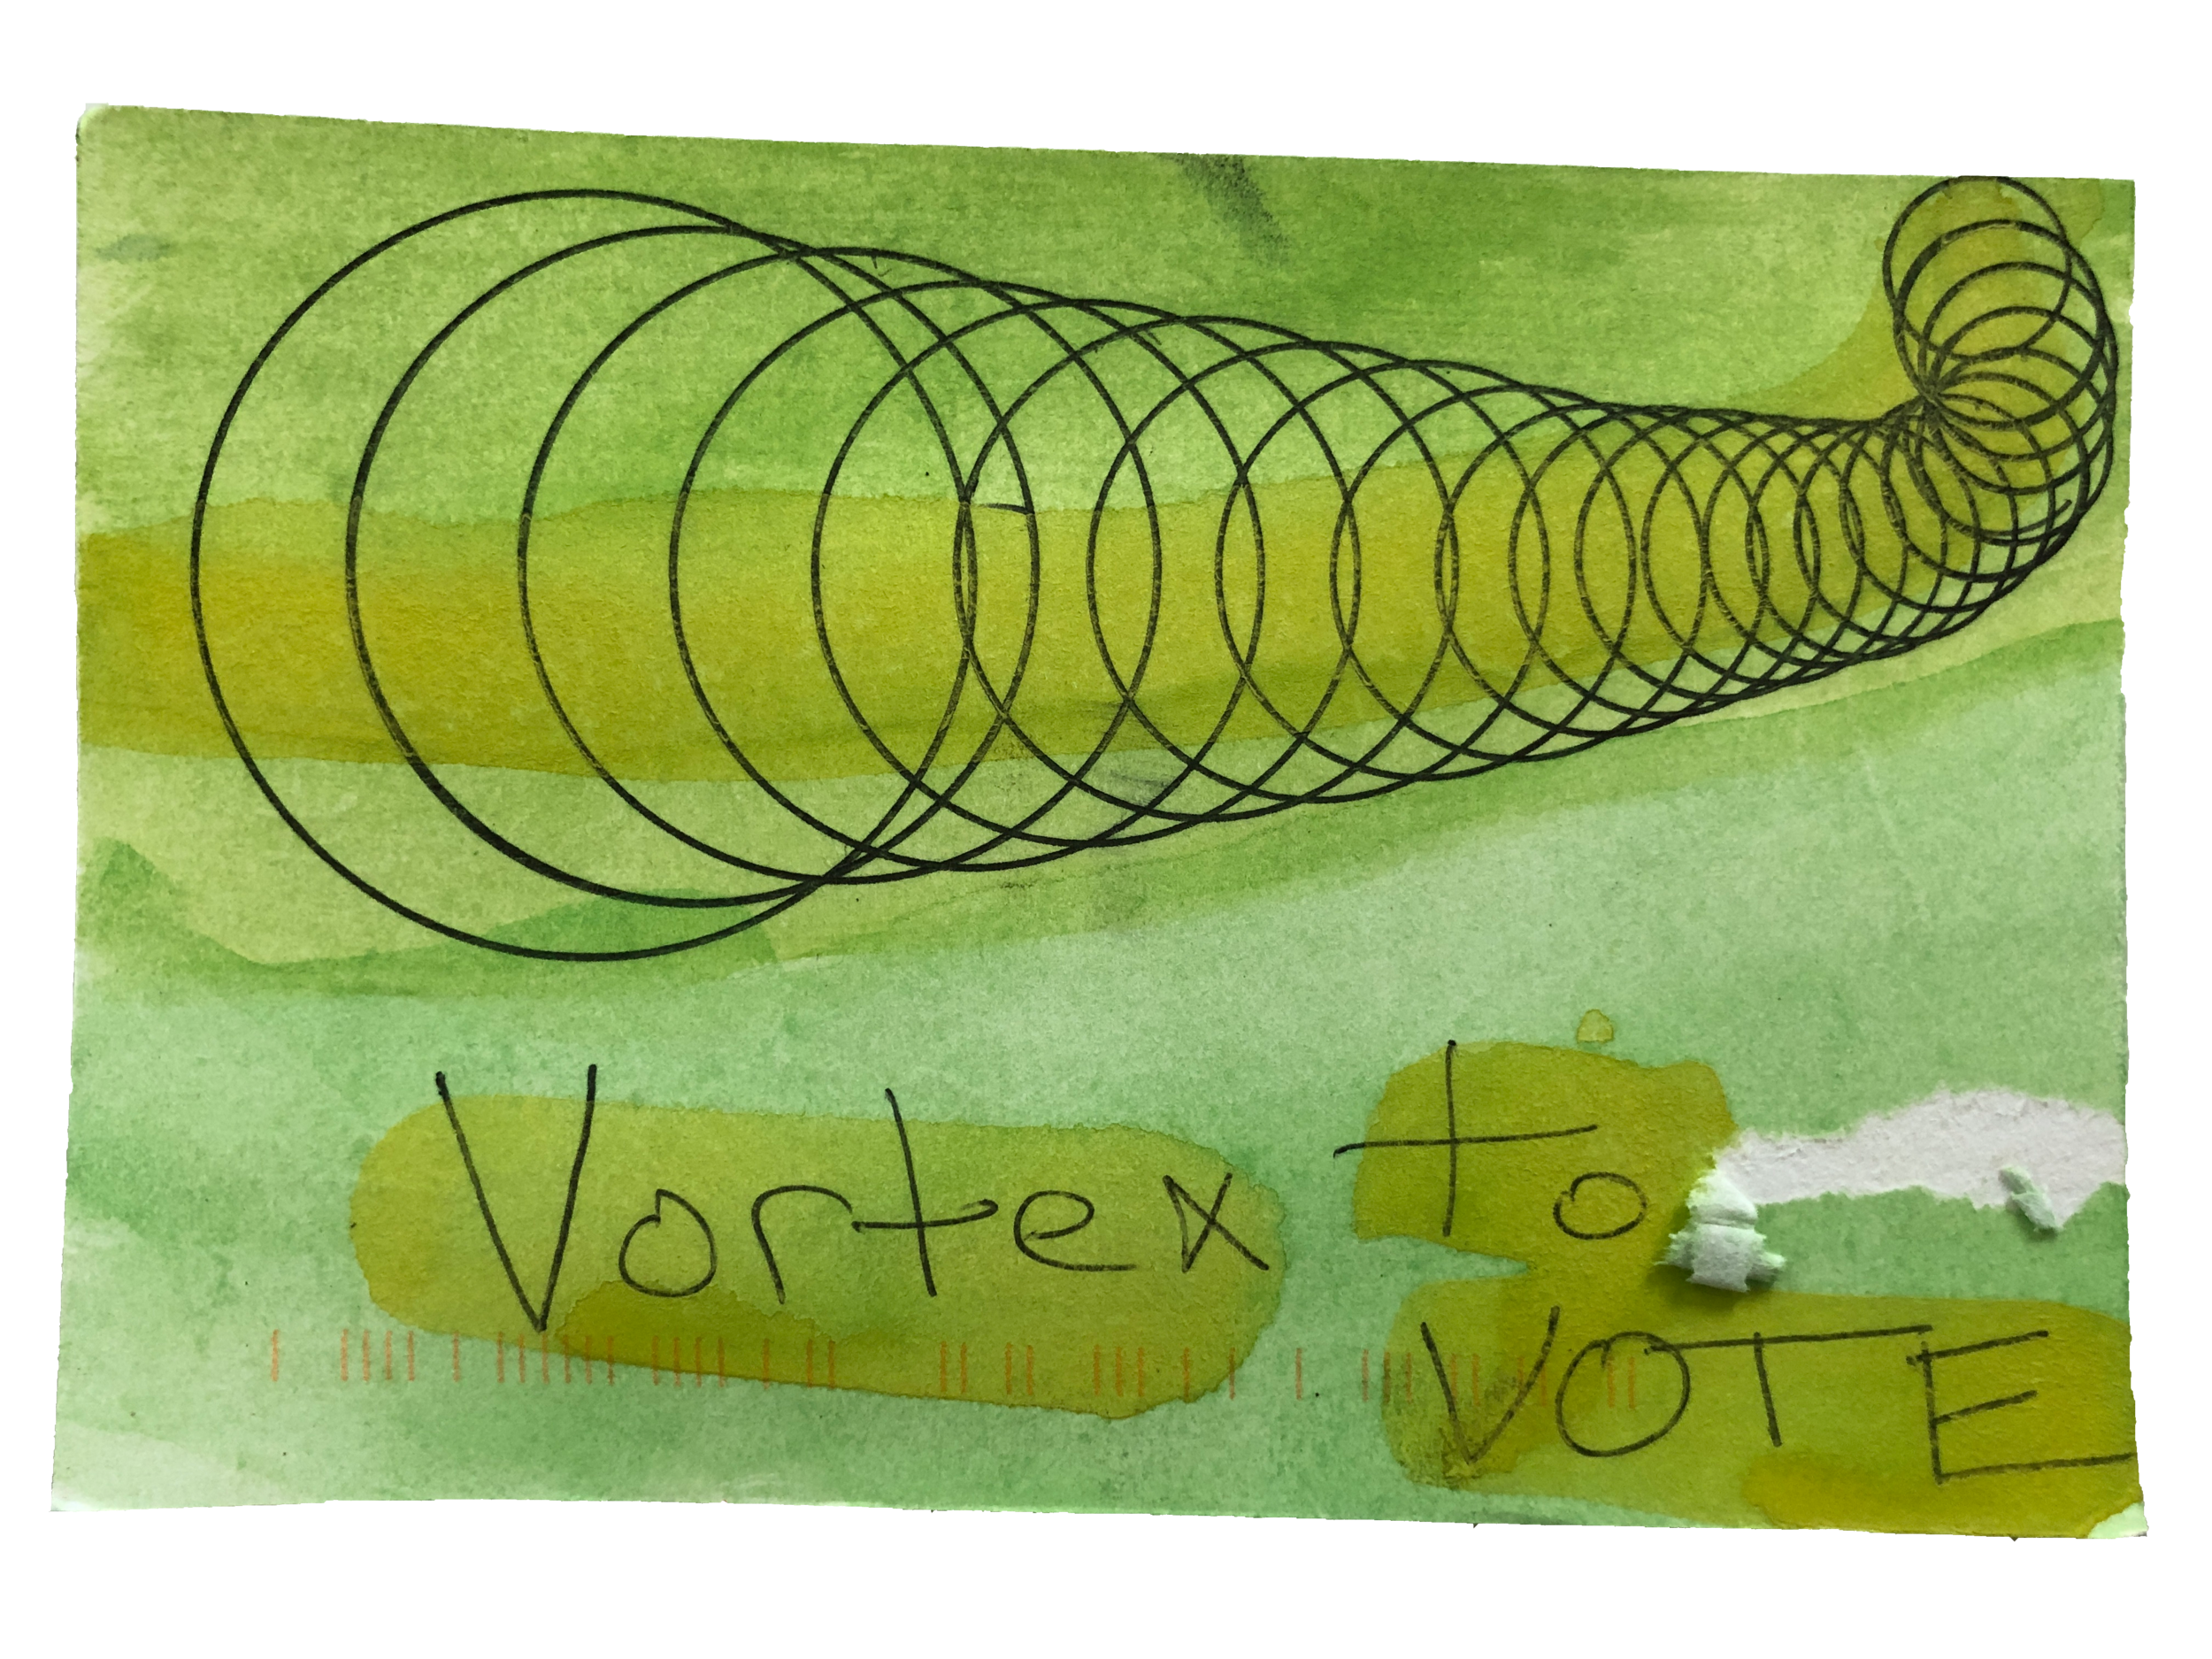 Vortex to Vote by Anon.png